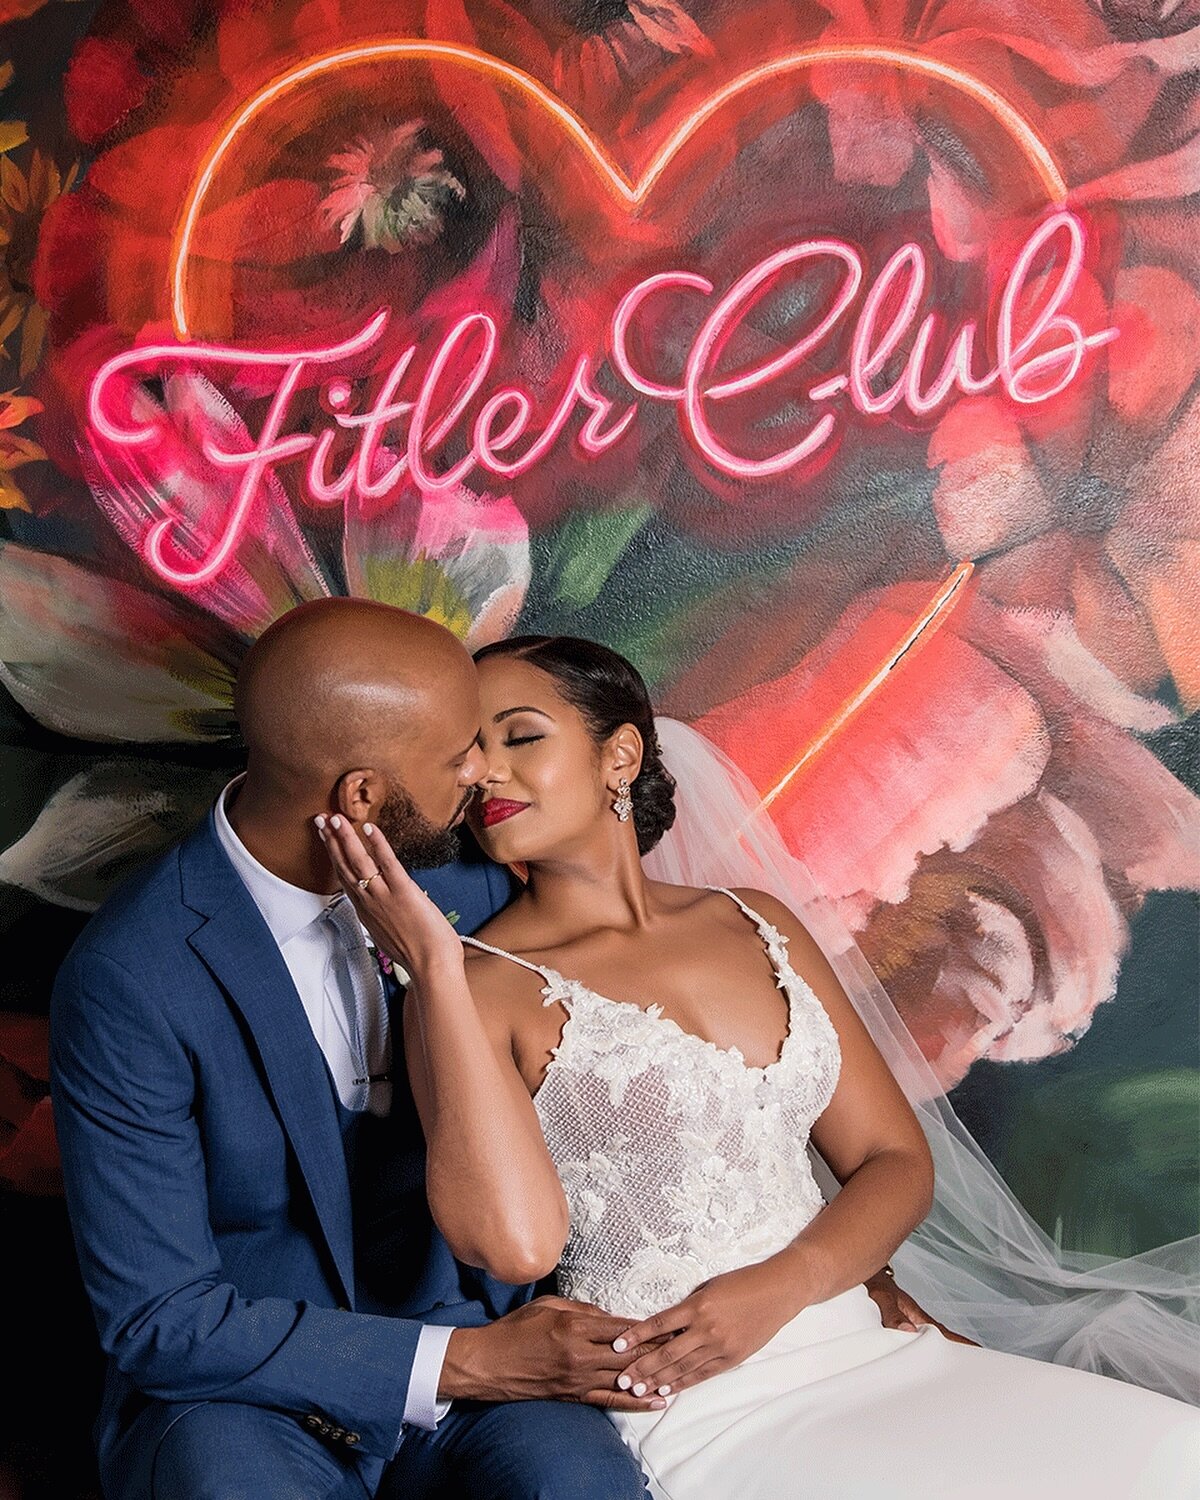 Hoping that this Valentine&rsquo;s Day you are close to the one you love, surrounded by love ❤️.
.
Vendor Team
Bride: @ldawson01
Groom: @thomasceo
Venue: @fitlerclub
Wedding Planner: @the_styled_stem
Florist: @florist.amaranth
MUA: @glambysharan
Hair